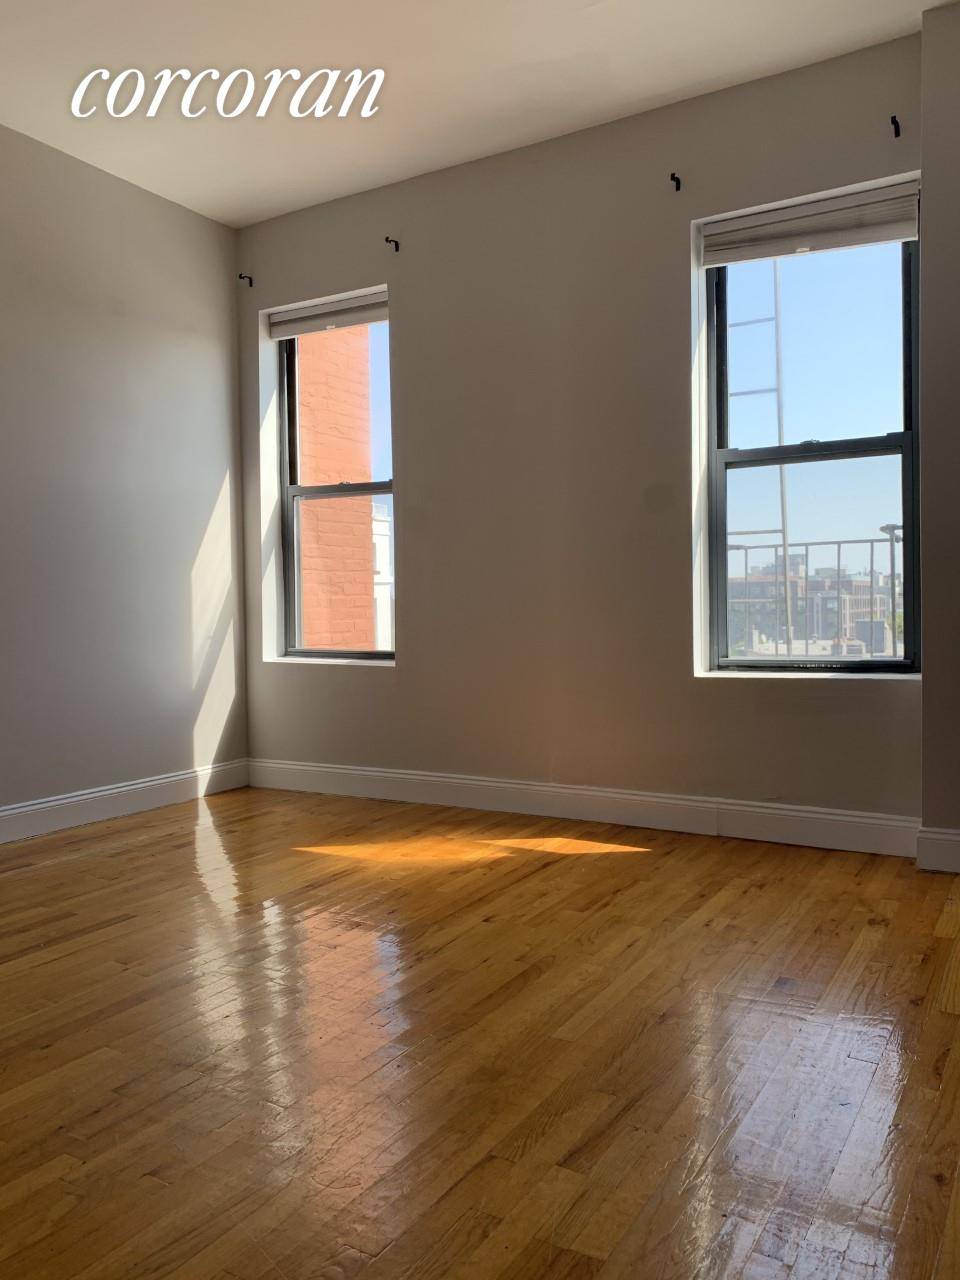 Sunny Renovated Large 2 Bedroom on Havemeyer Street 3 Flights Up and 2 Flights Up New Kitchen with Dishwasher Large Living Room, 1 King Size Bedroom and 1 Queen Size ...